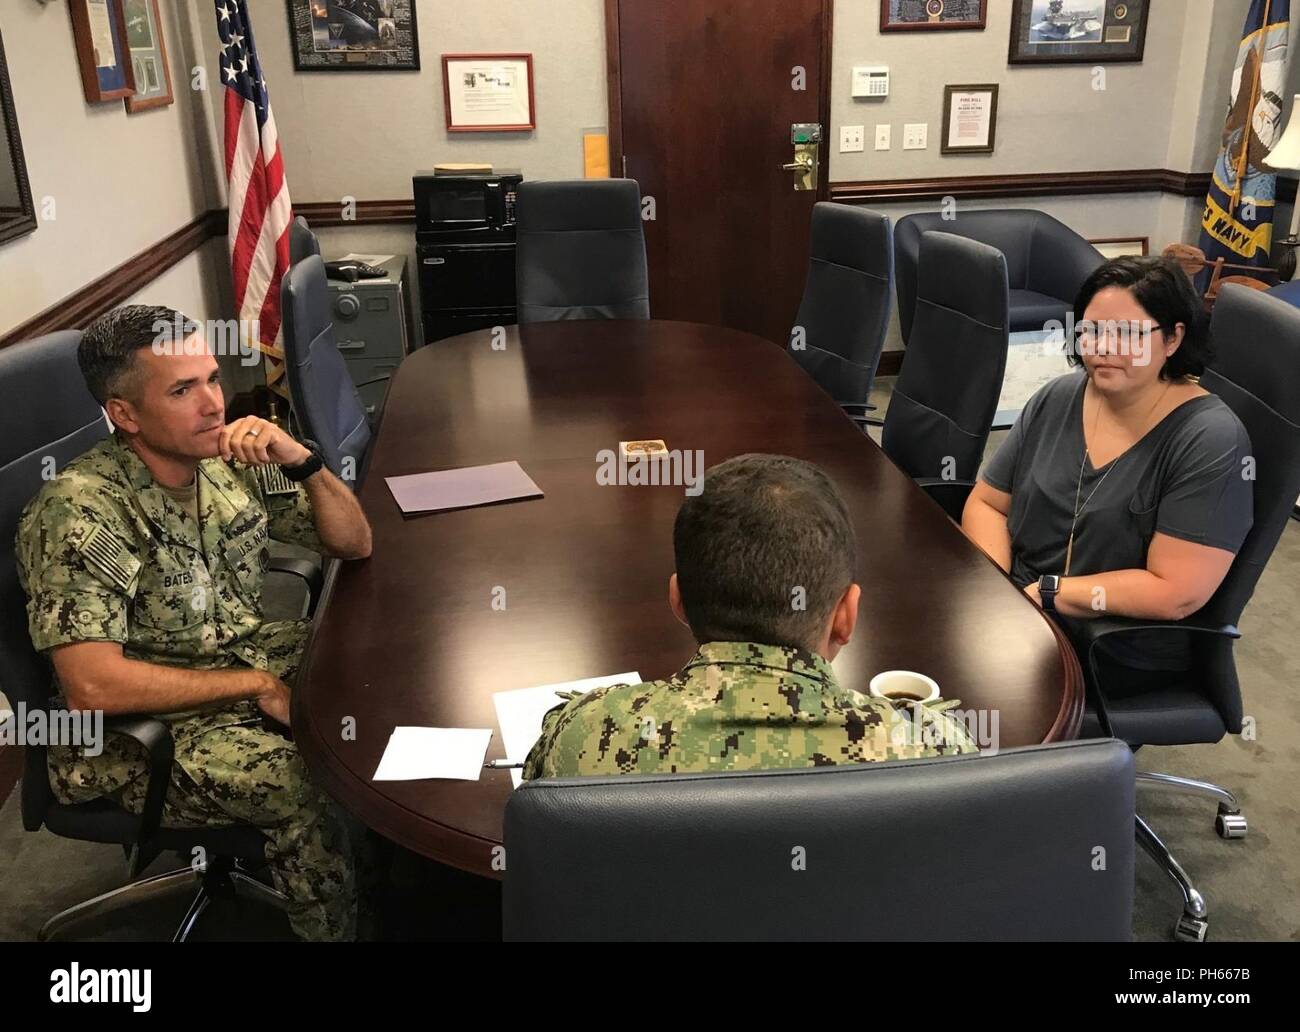 Fla. (June 27, 2018) Heidi Theis, the Center for Information Warfare Training Command's (CIWT) ombudsman, met with Capt. Nick Andrews (center), CIWT's commanding officer, and CIWT's Command Master Chief Mike Bates this morning. The morale, health, welfare, and efficiency of command personnel are the responsibility of the commanding officer. The command ombudsman assists the commanding officer in carrying out this responsibility. Ombudsmen are professionally trained information and referral volunteers who serve as a vital two-way communication link between the command and family members. The pr Stock Photo